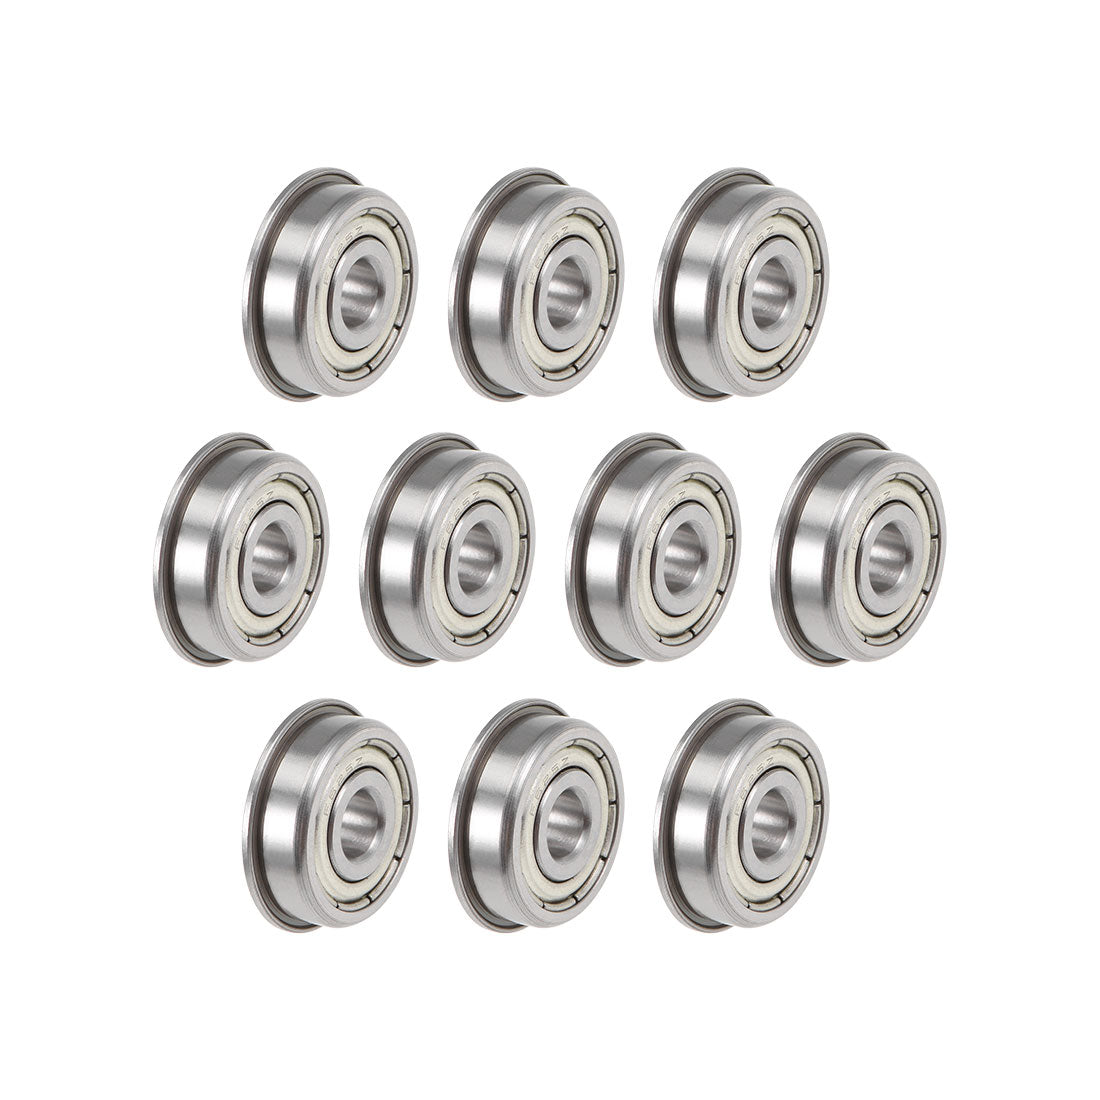 uxcell Uxcell Flange Ball Bearings Double Shield Chrome Bearing